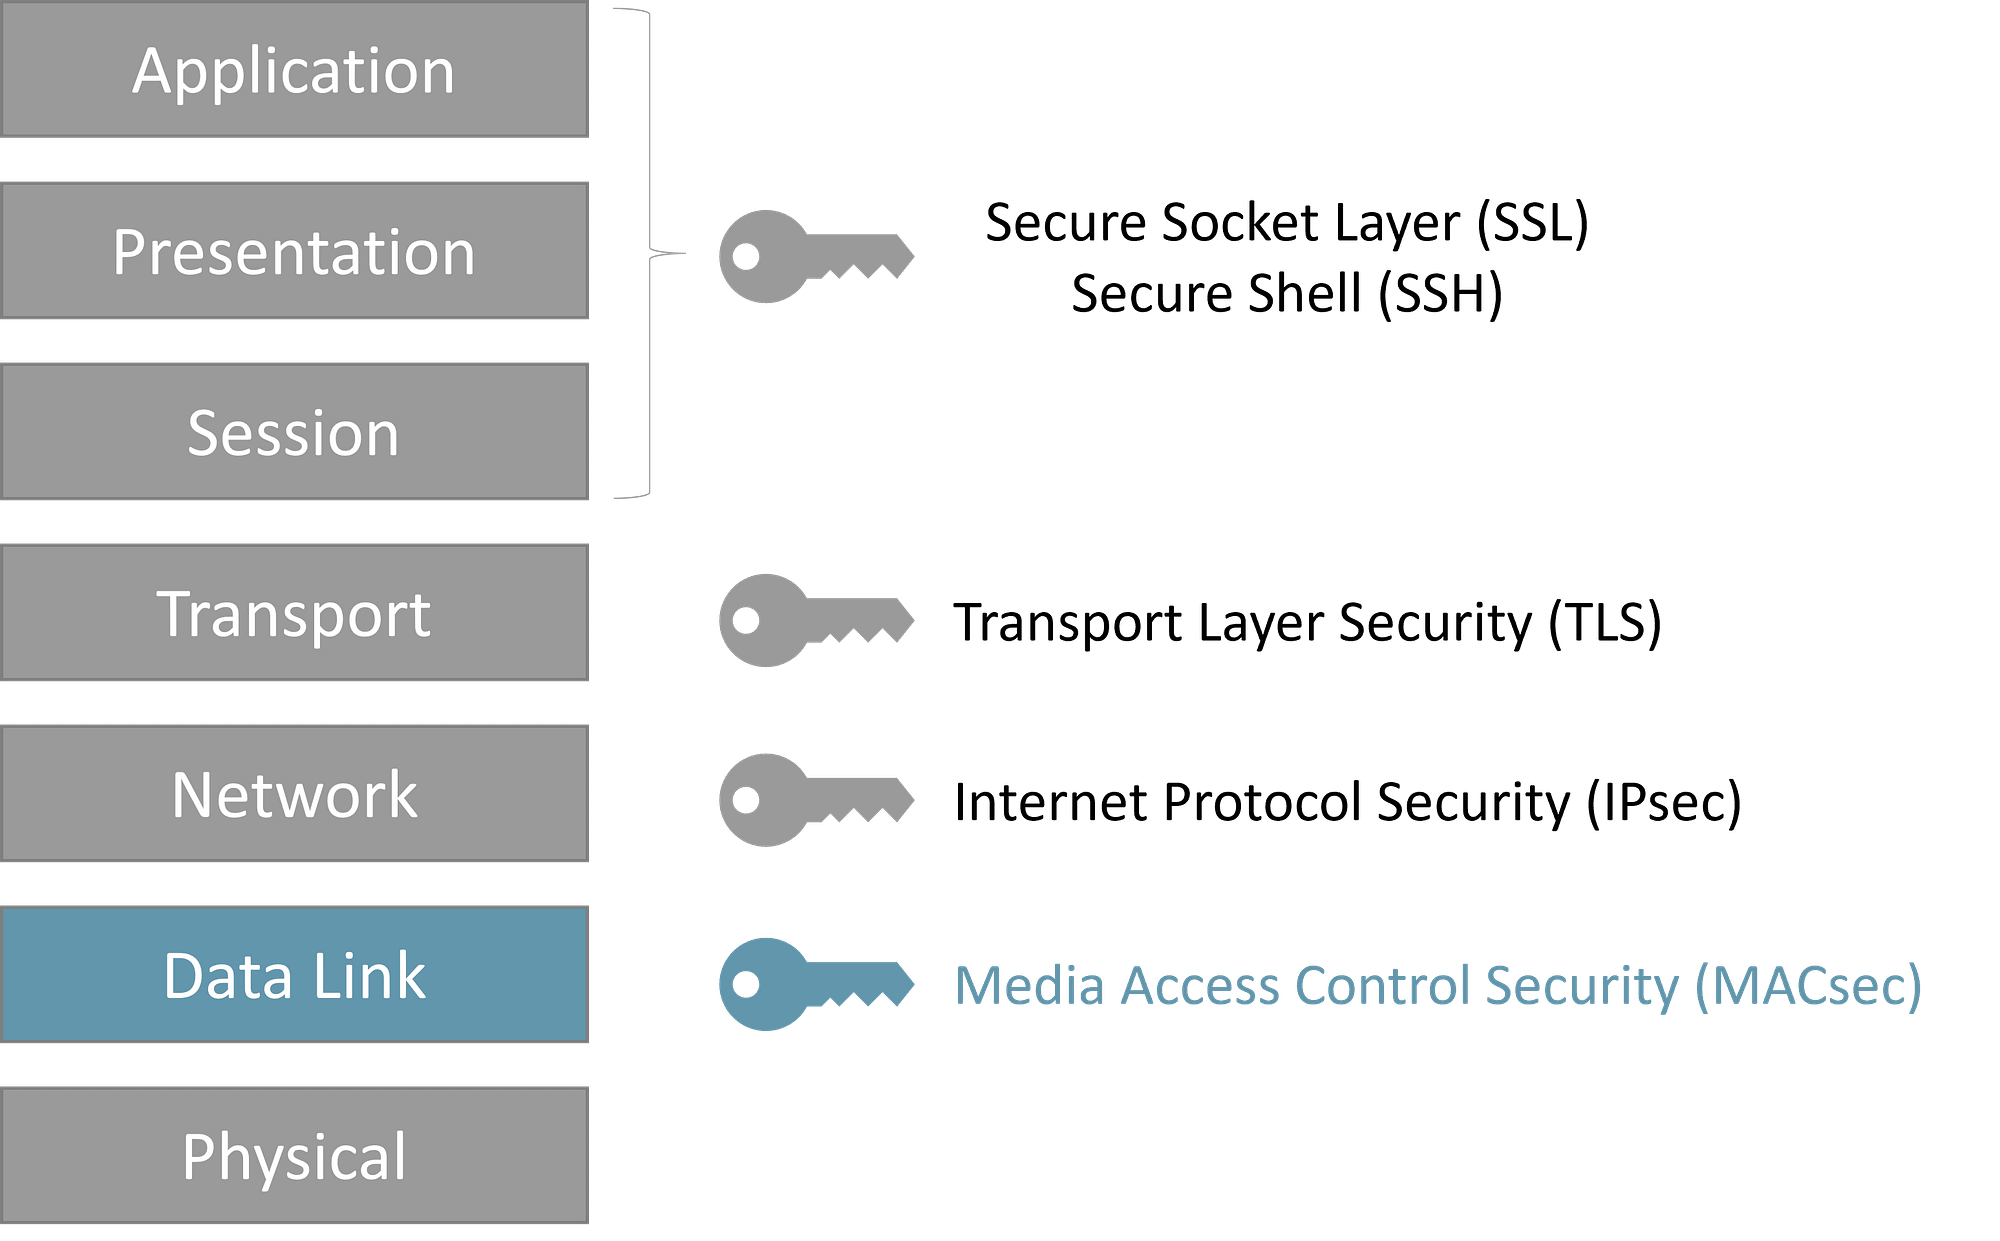 Security specific to each network layer